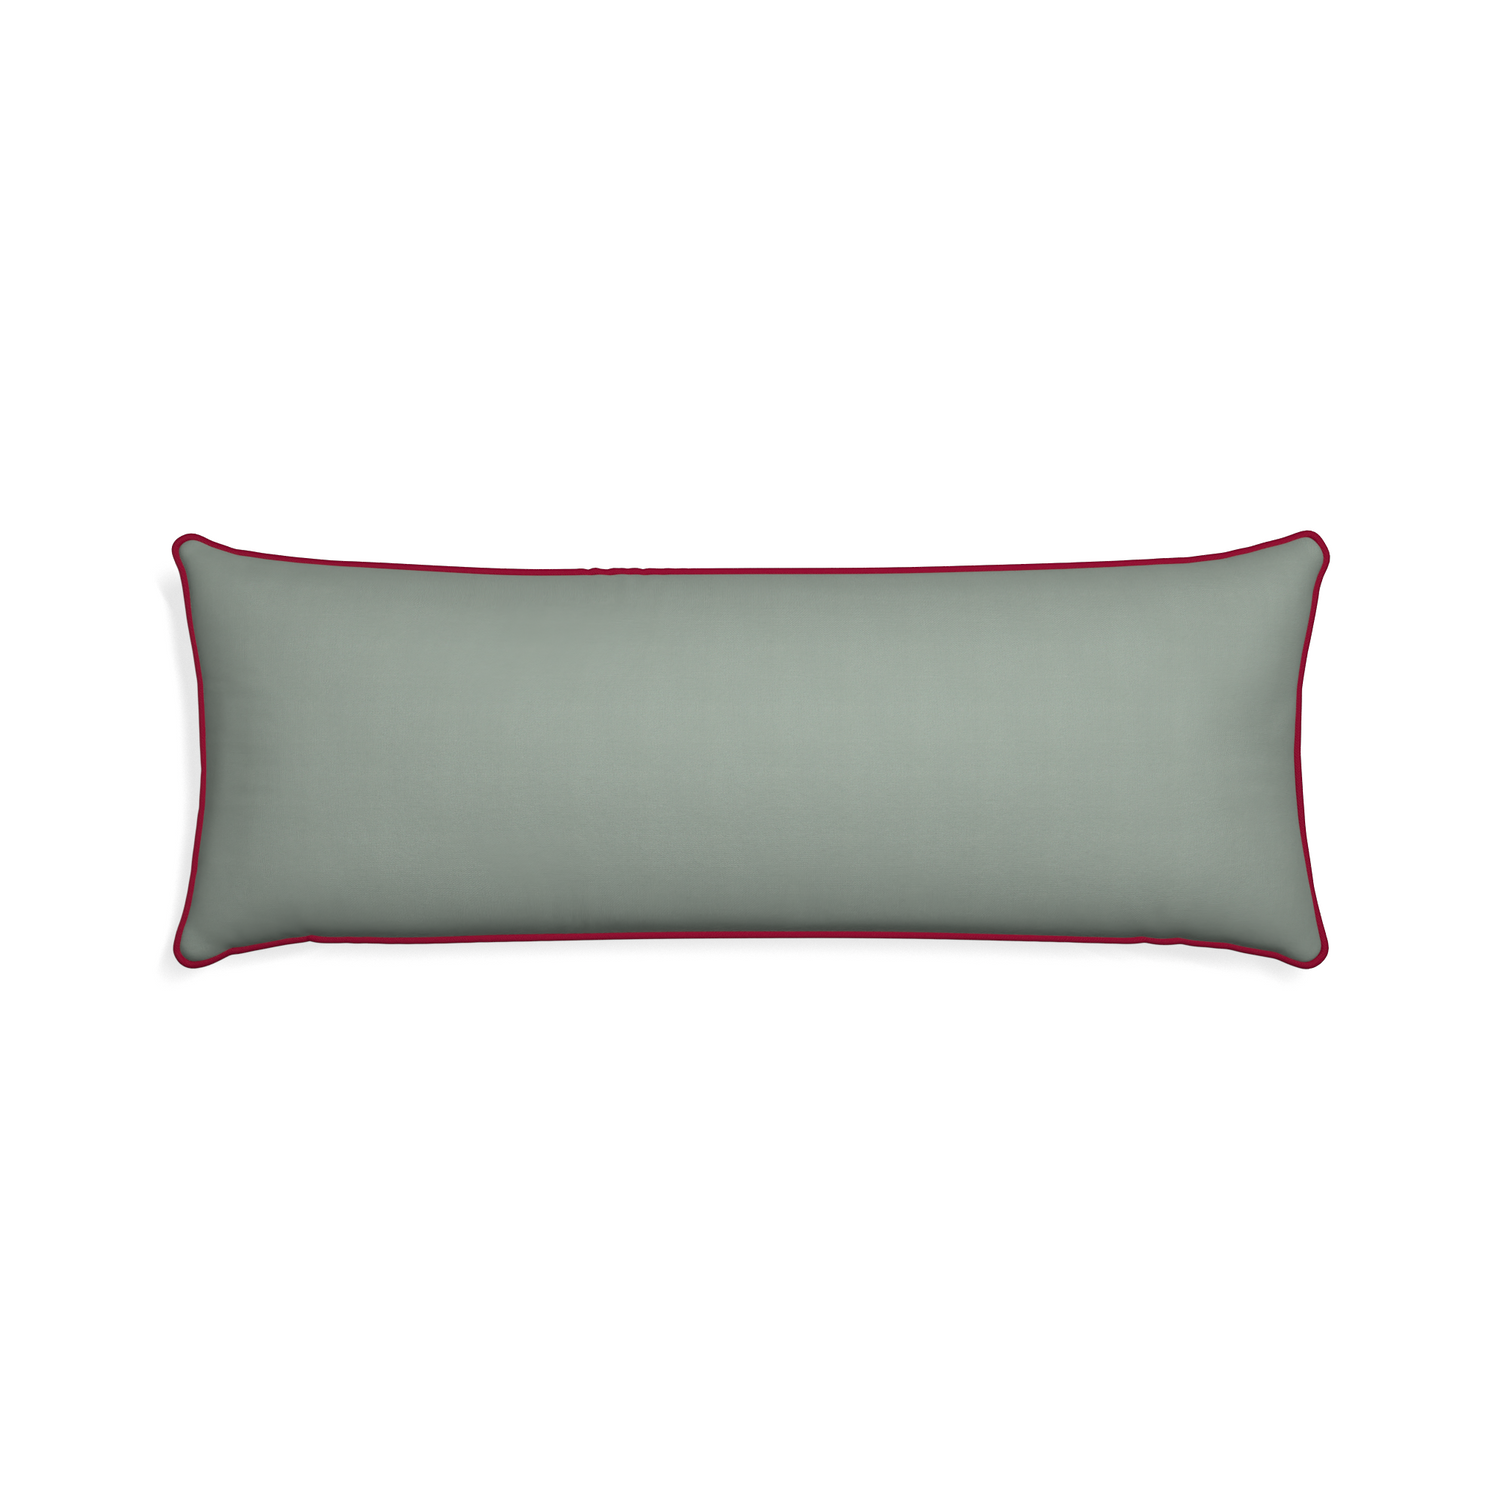 Xl-lumbar sage custom sage green cottonpillow with raspberry piping on white background